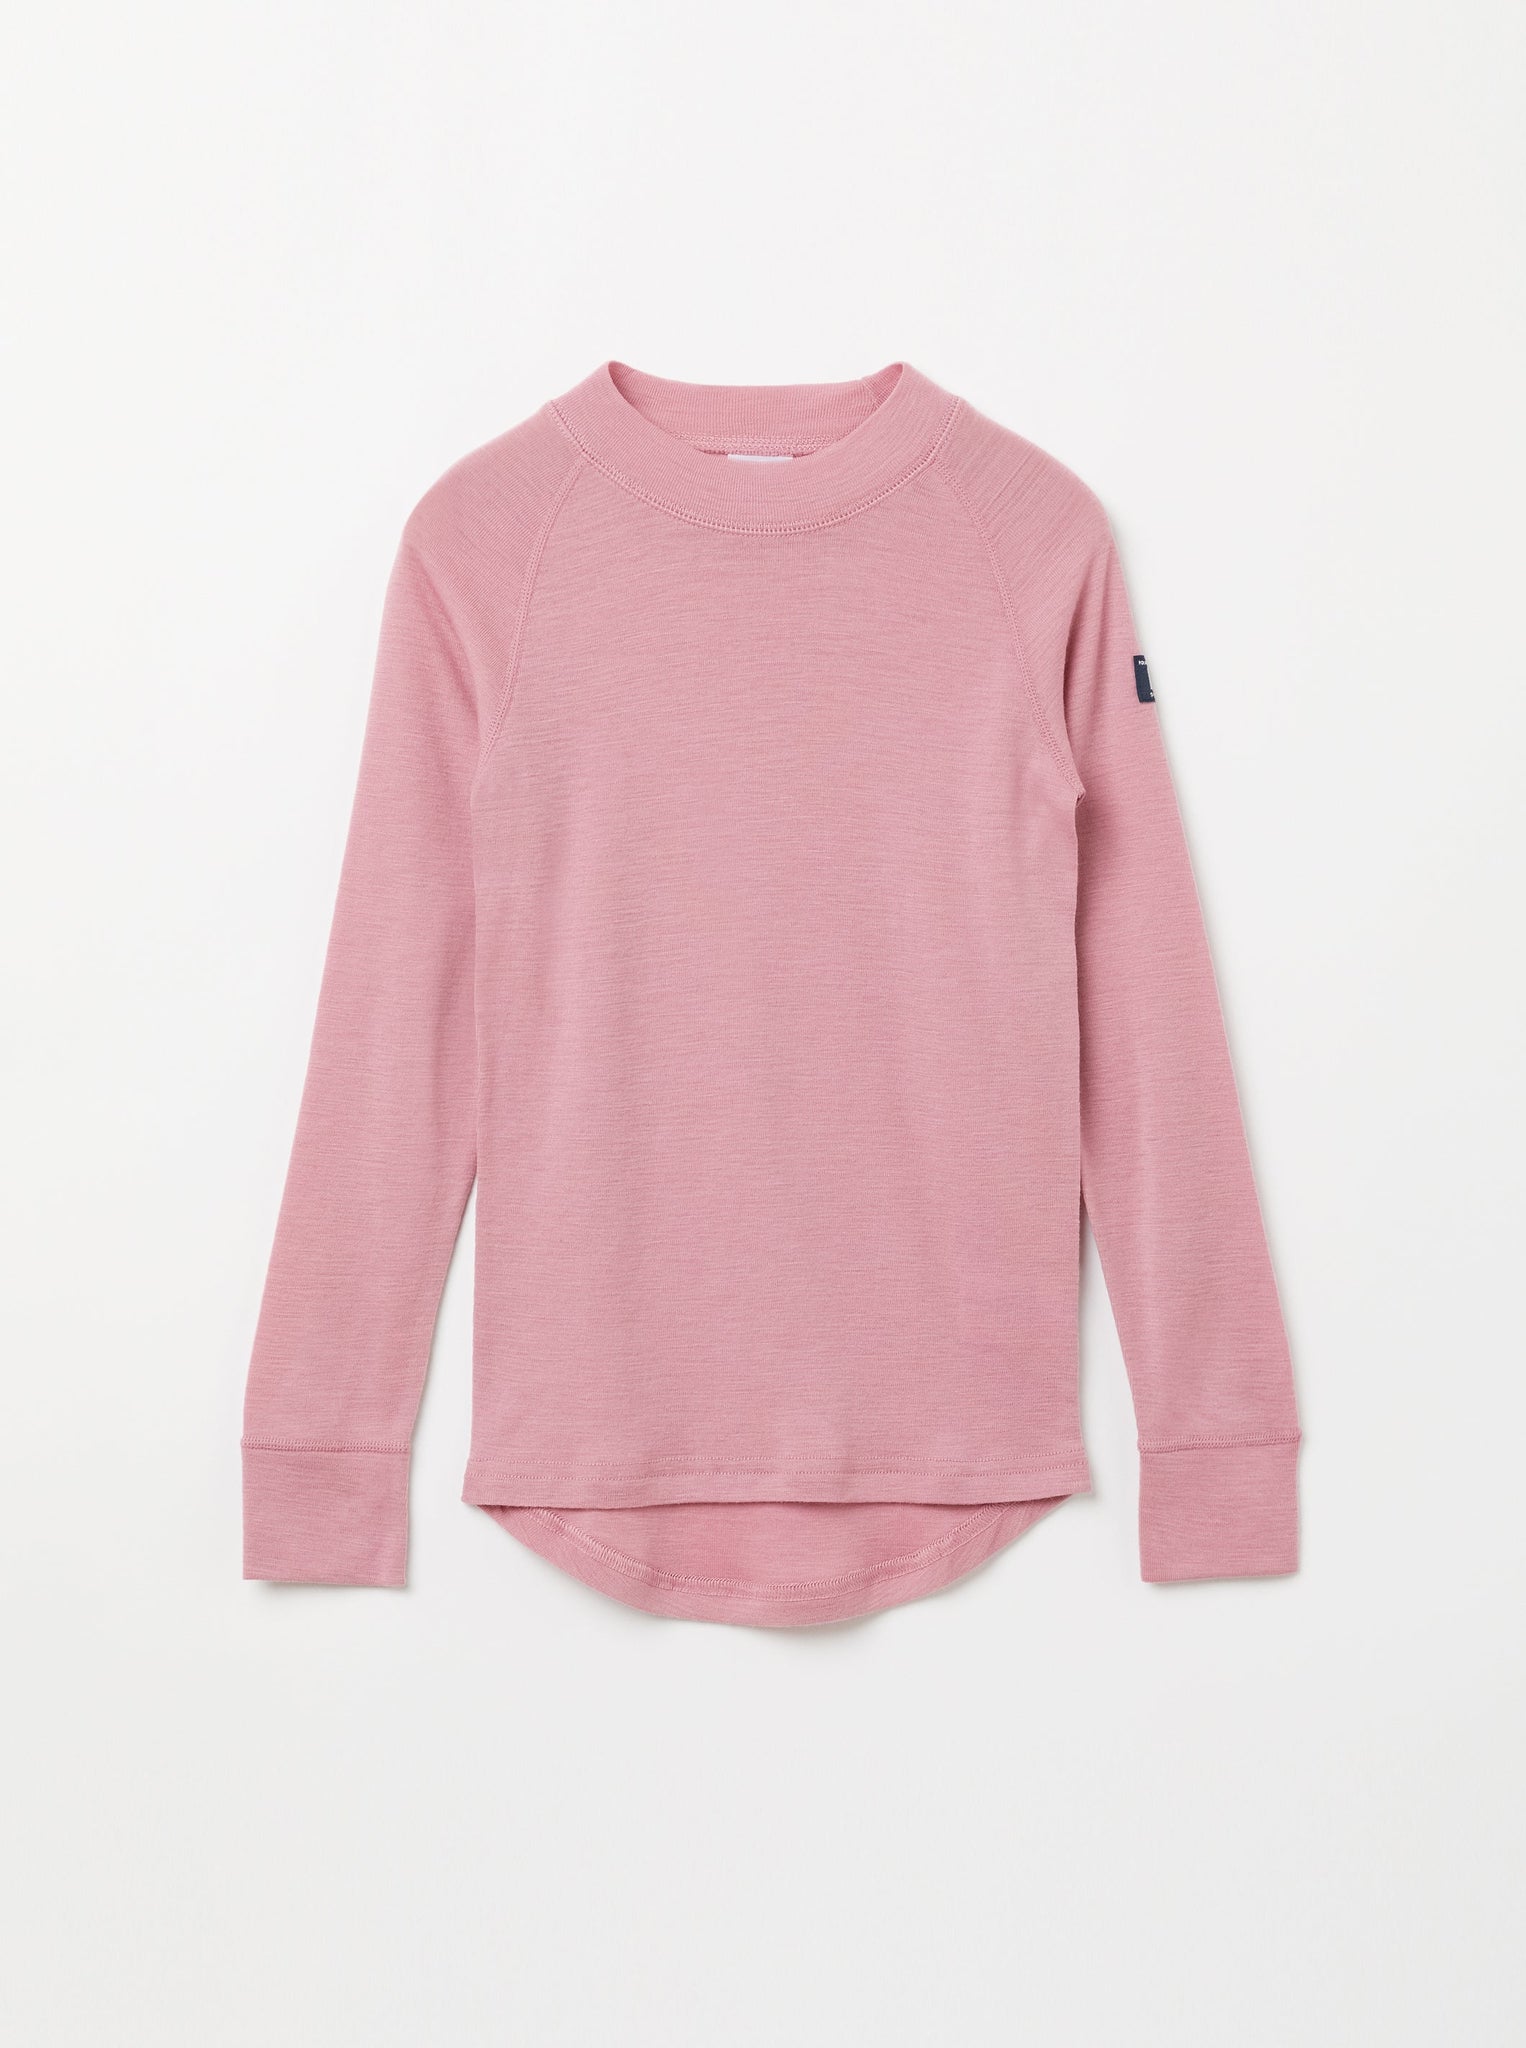 Merino Wool Pink Thermal Kids Top from the Polarn O. Pyret kidswear collection. Made from sustainable sources.